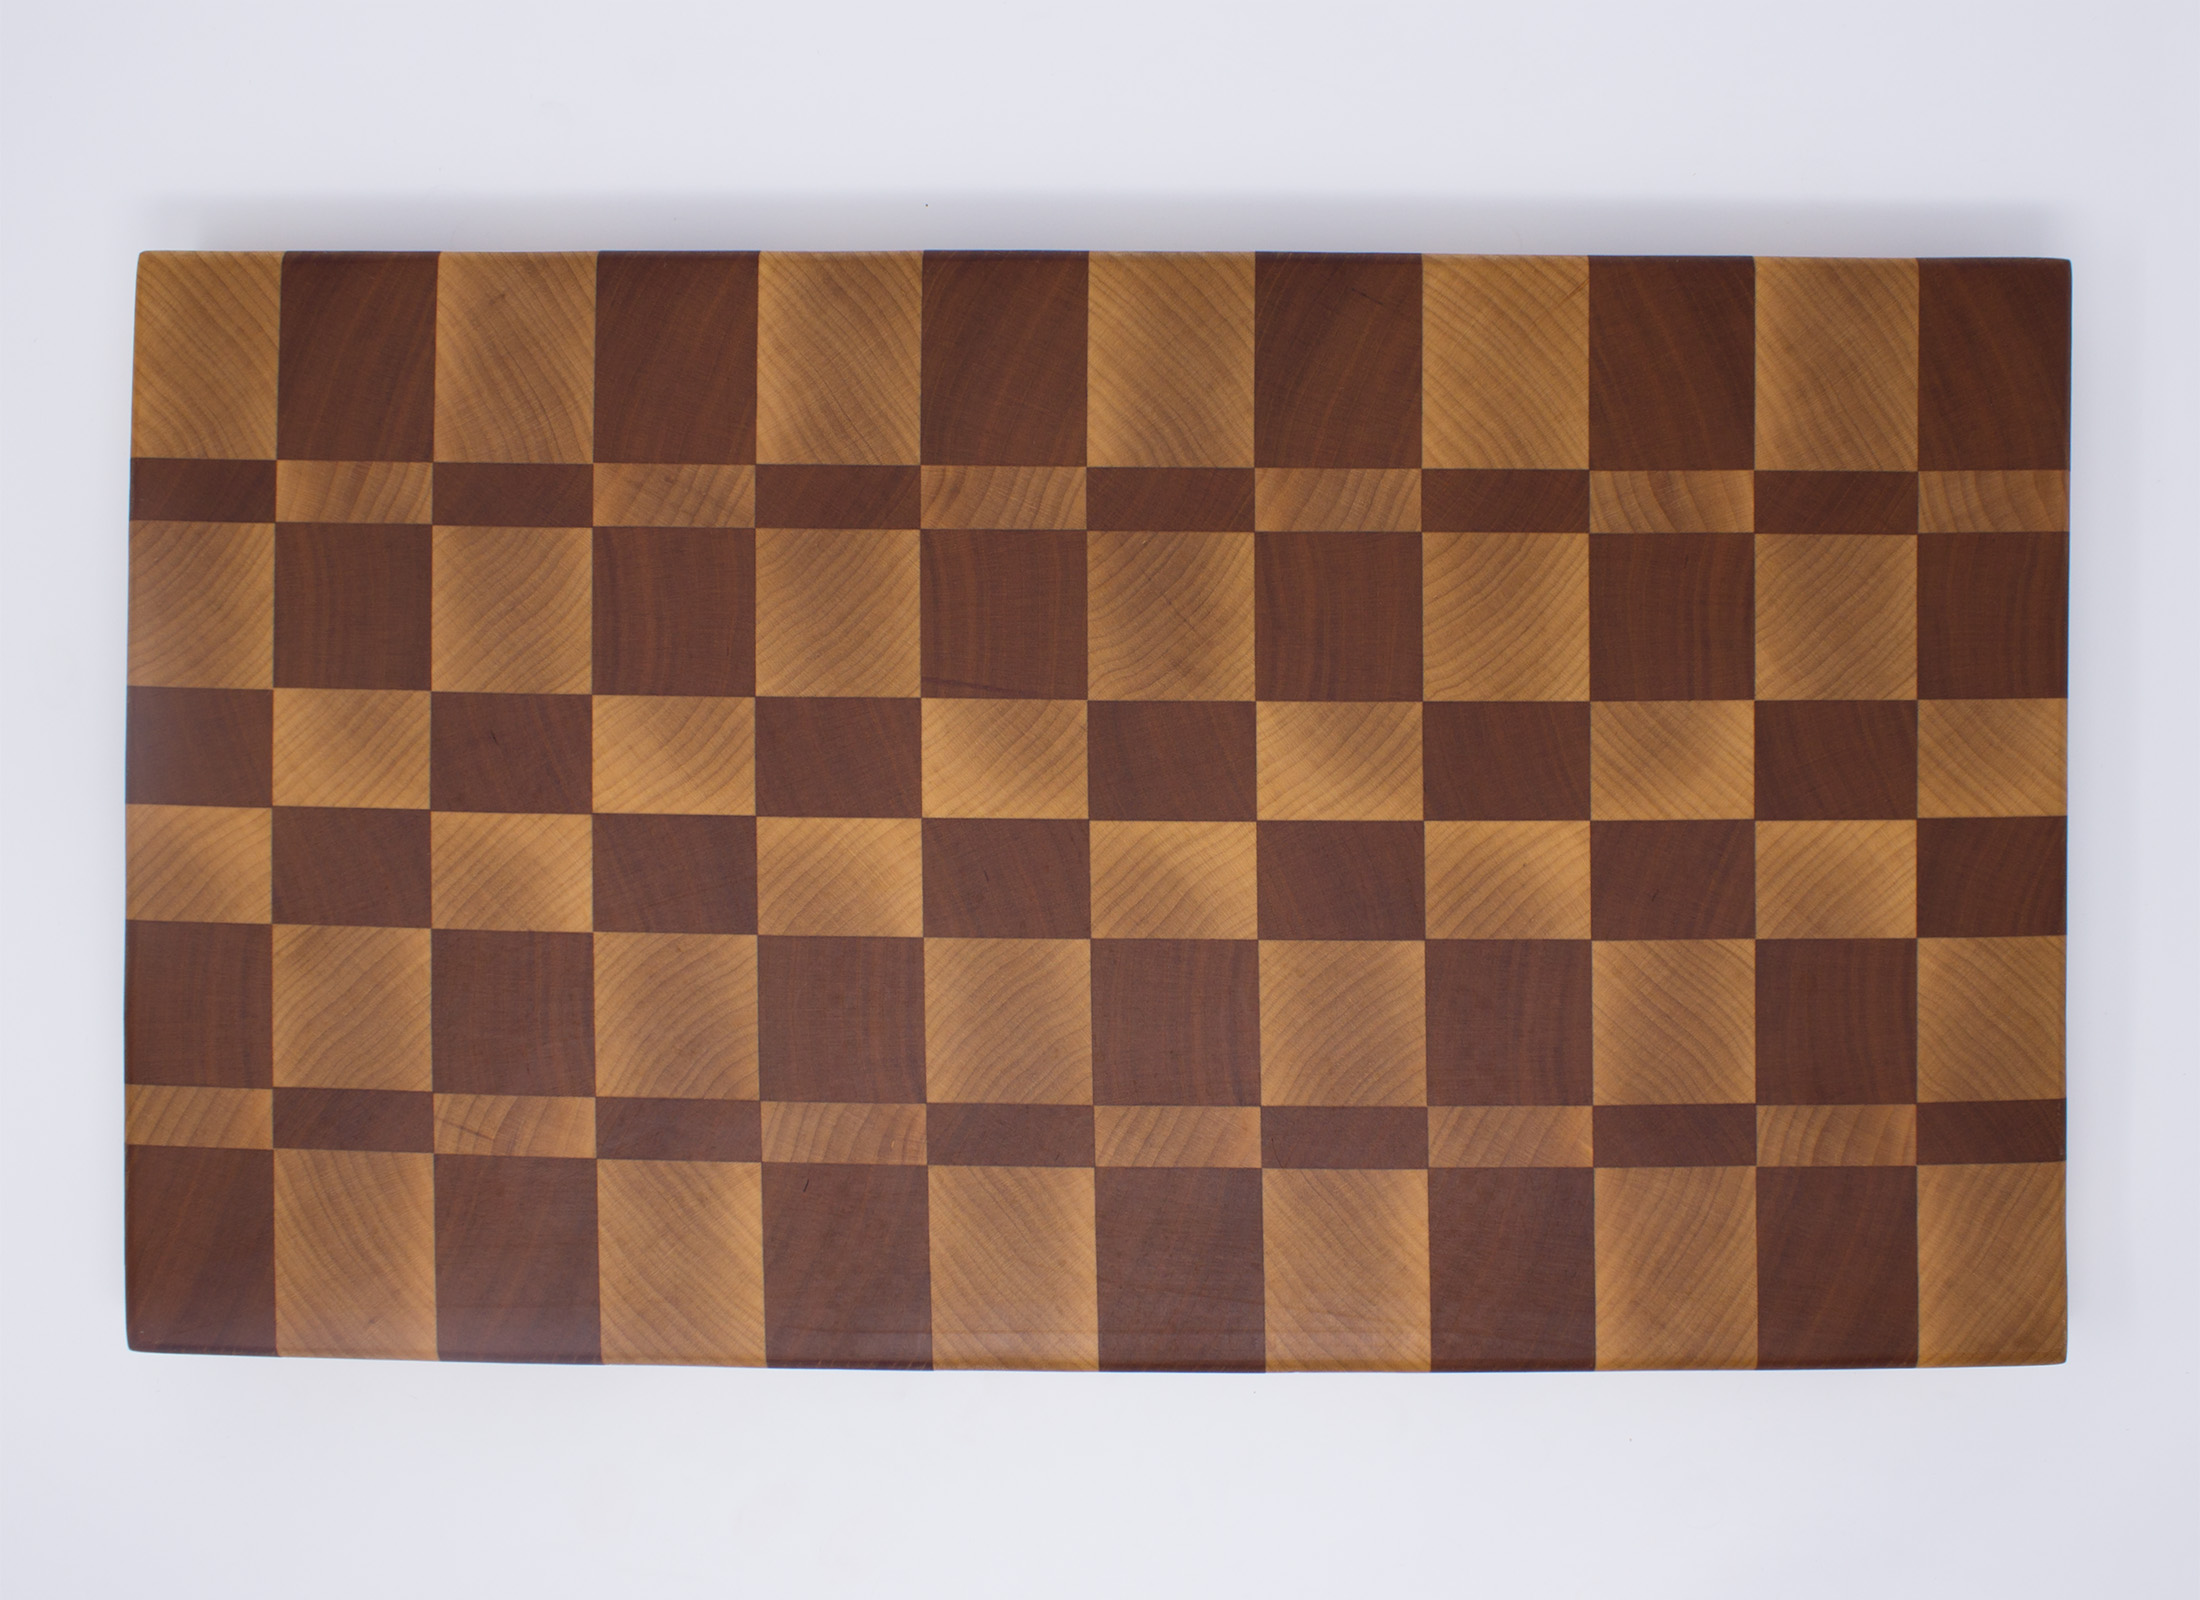 https://www.rockfordwoodcrafts.com/wp-content/uploads/Maple-and-Cherry-Checkerboard-End-Grain-Cutting-Board-Top.jpg